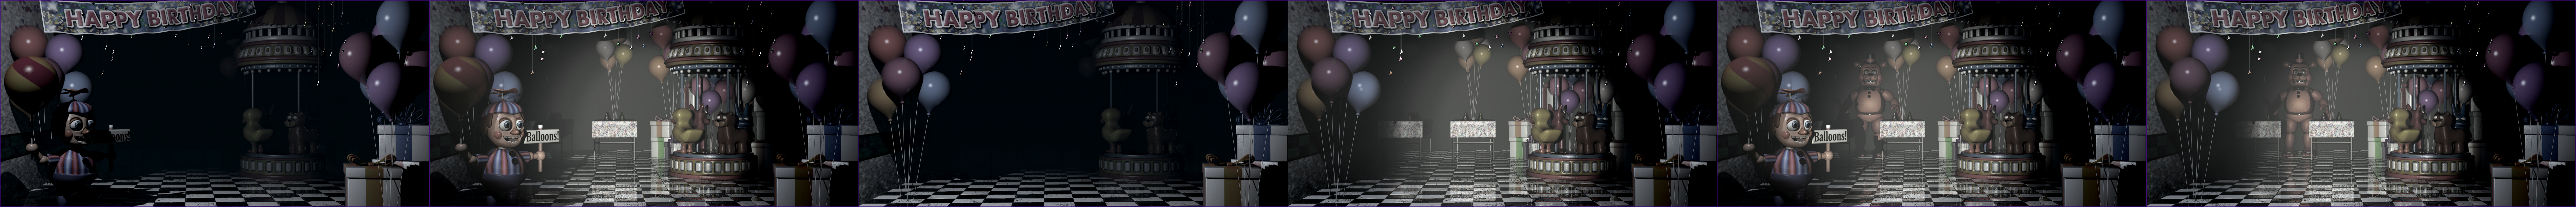 Five Nights at Freddy's 2 - Game Area